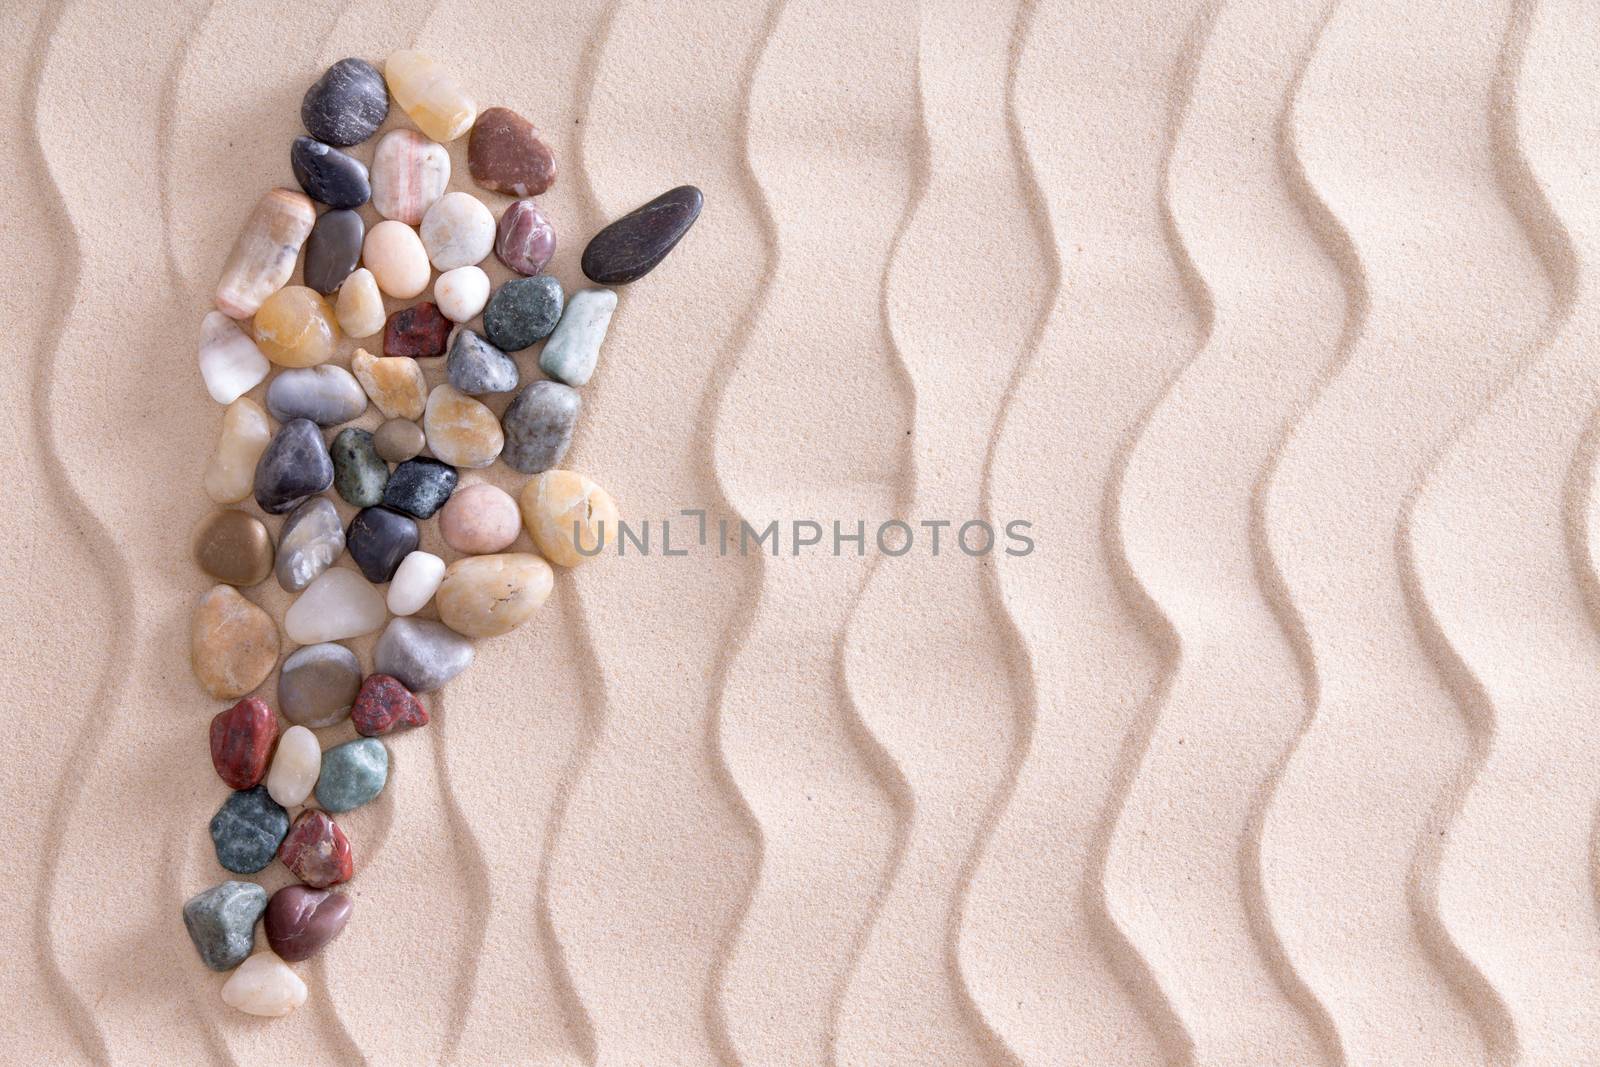 Creative colorful pebble map of Argentina using smooth waterworn agate and quartzite stones on decorative beach sand with a wavy pattern depicting ripples, with copyspace for a travel template